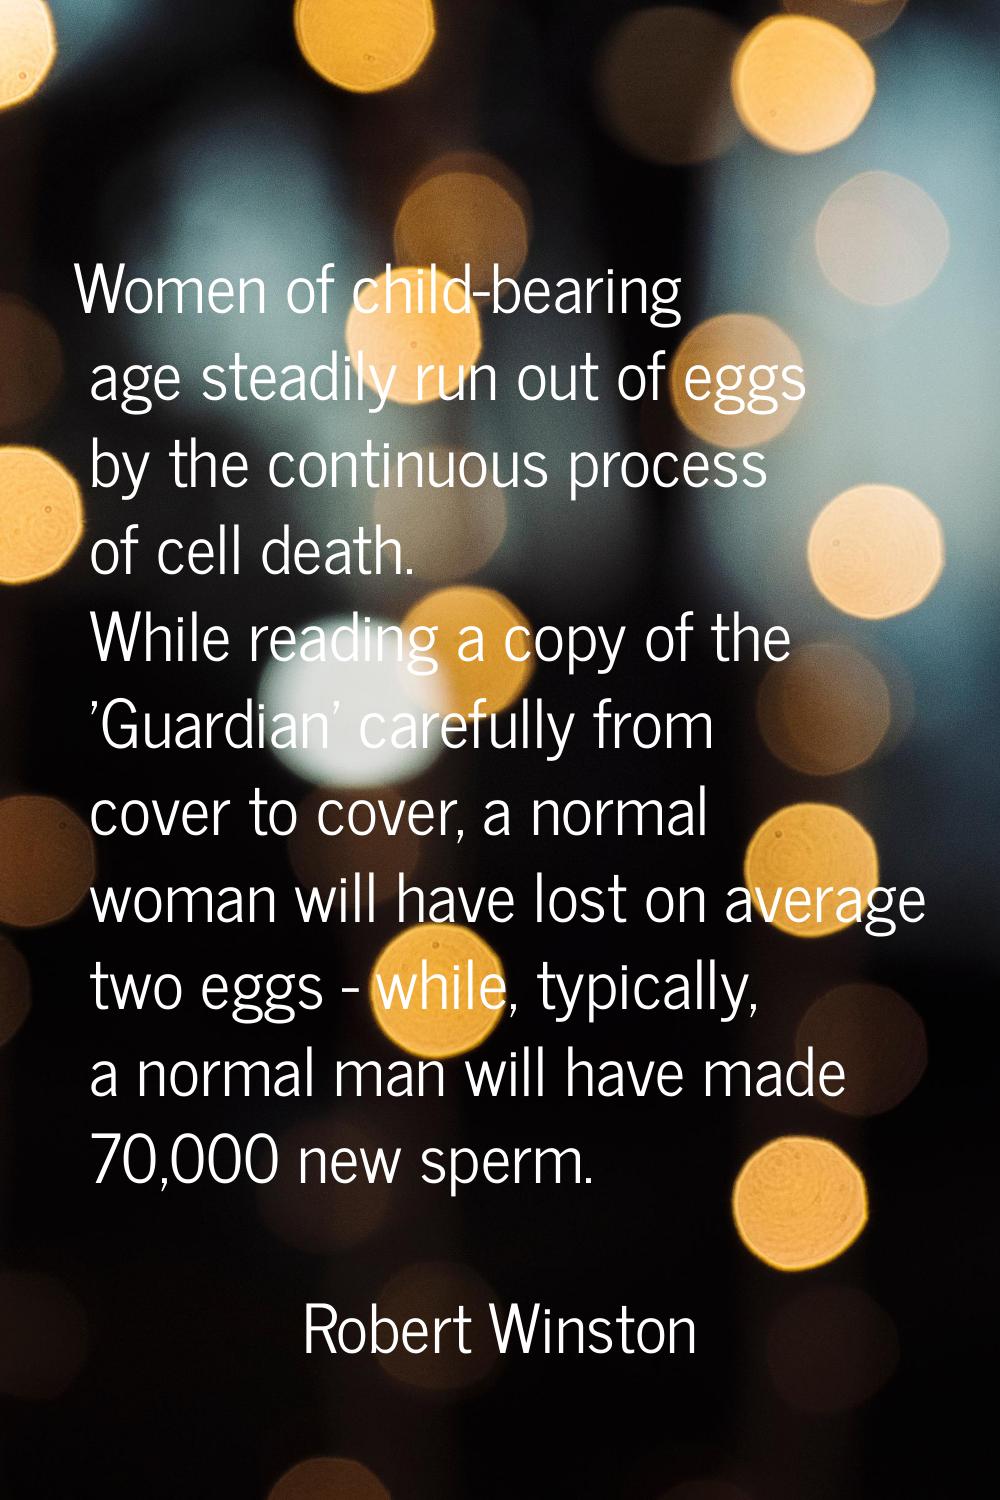 Women of child-bearing age steadily run out of eggs by the continuous process of cell death. While 